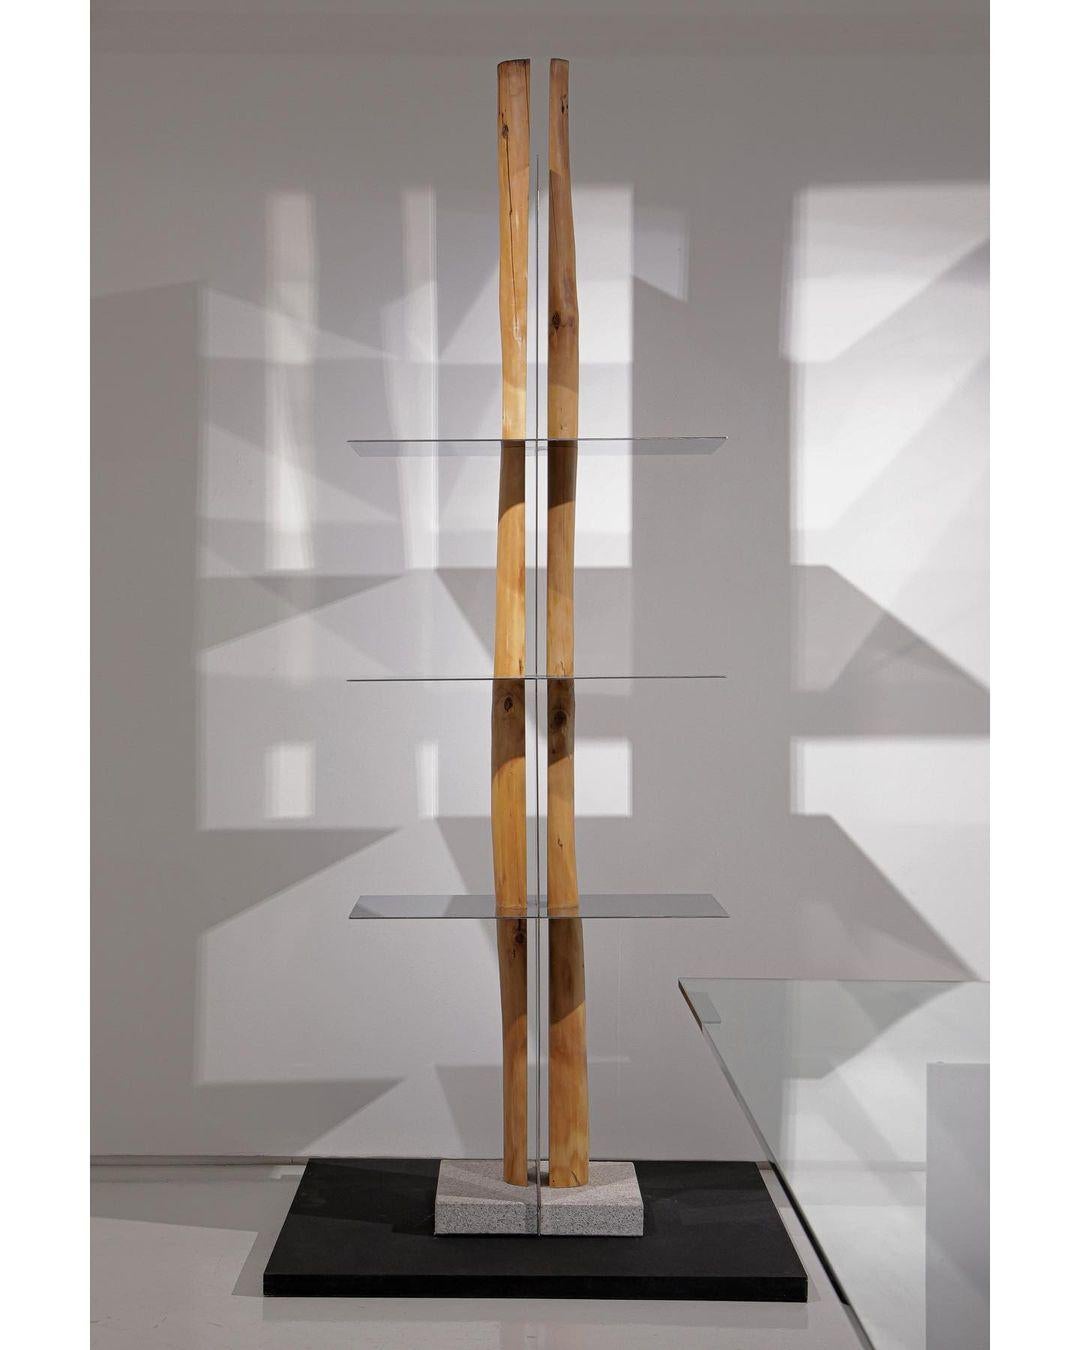 Korean Hanok split shelf by Shinkyu Shon
Dimensions: 40 x 75 x 230cm
Made with Korean old pine tree and polished stainless steel


Shon Shin-kyu graduated from Sangmyung University with a Bachelor's degree in Furniture design, and is pursuing a